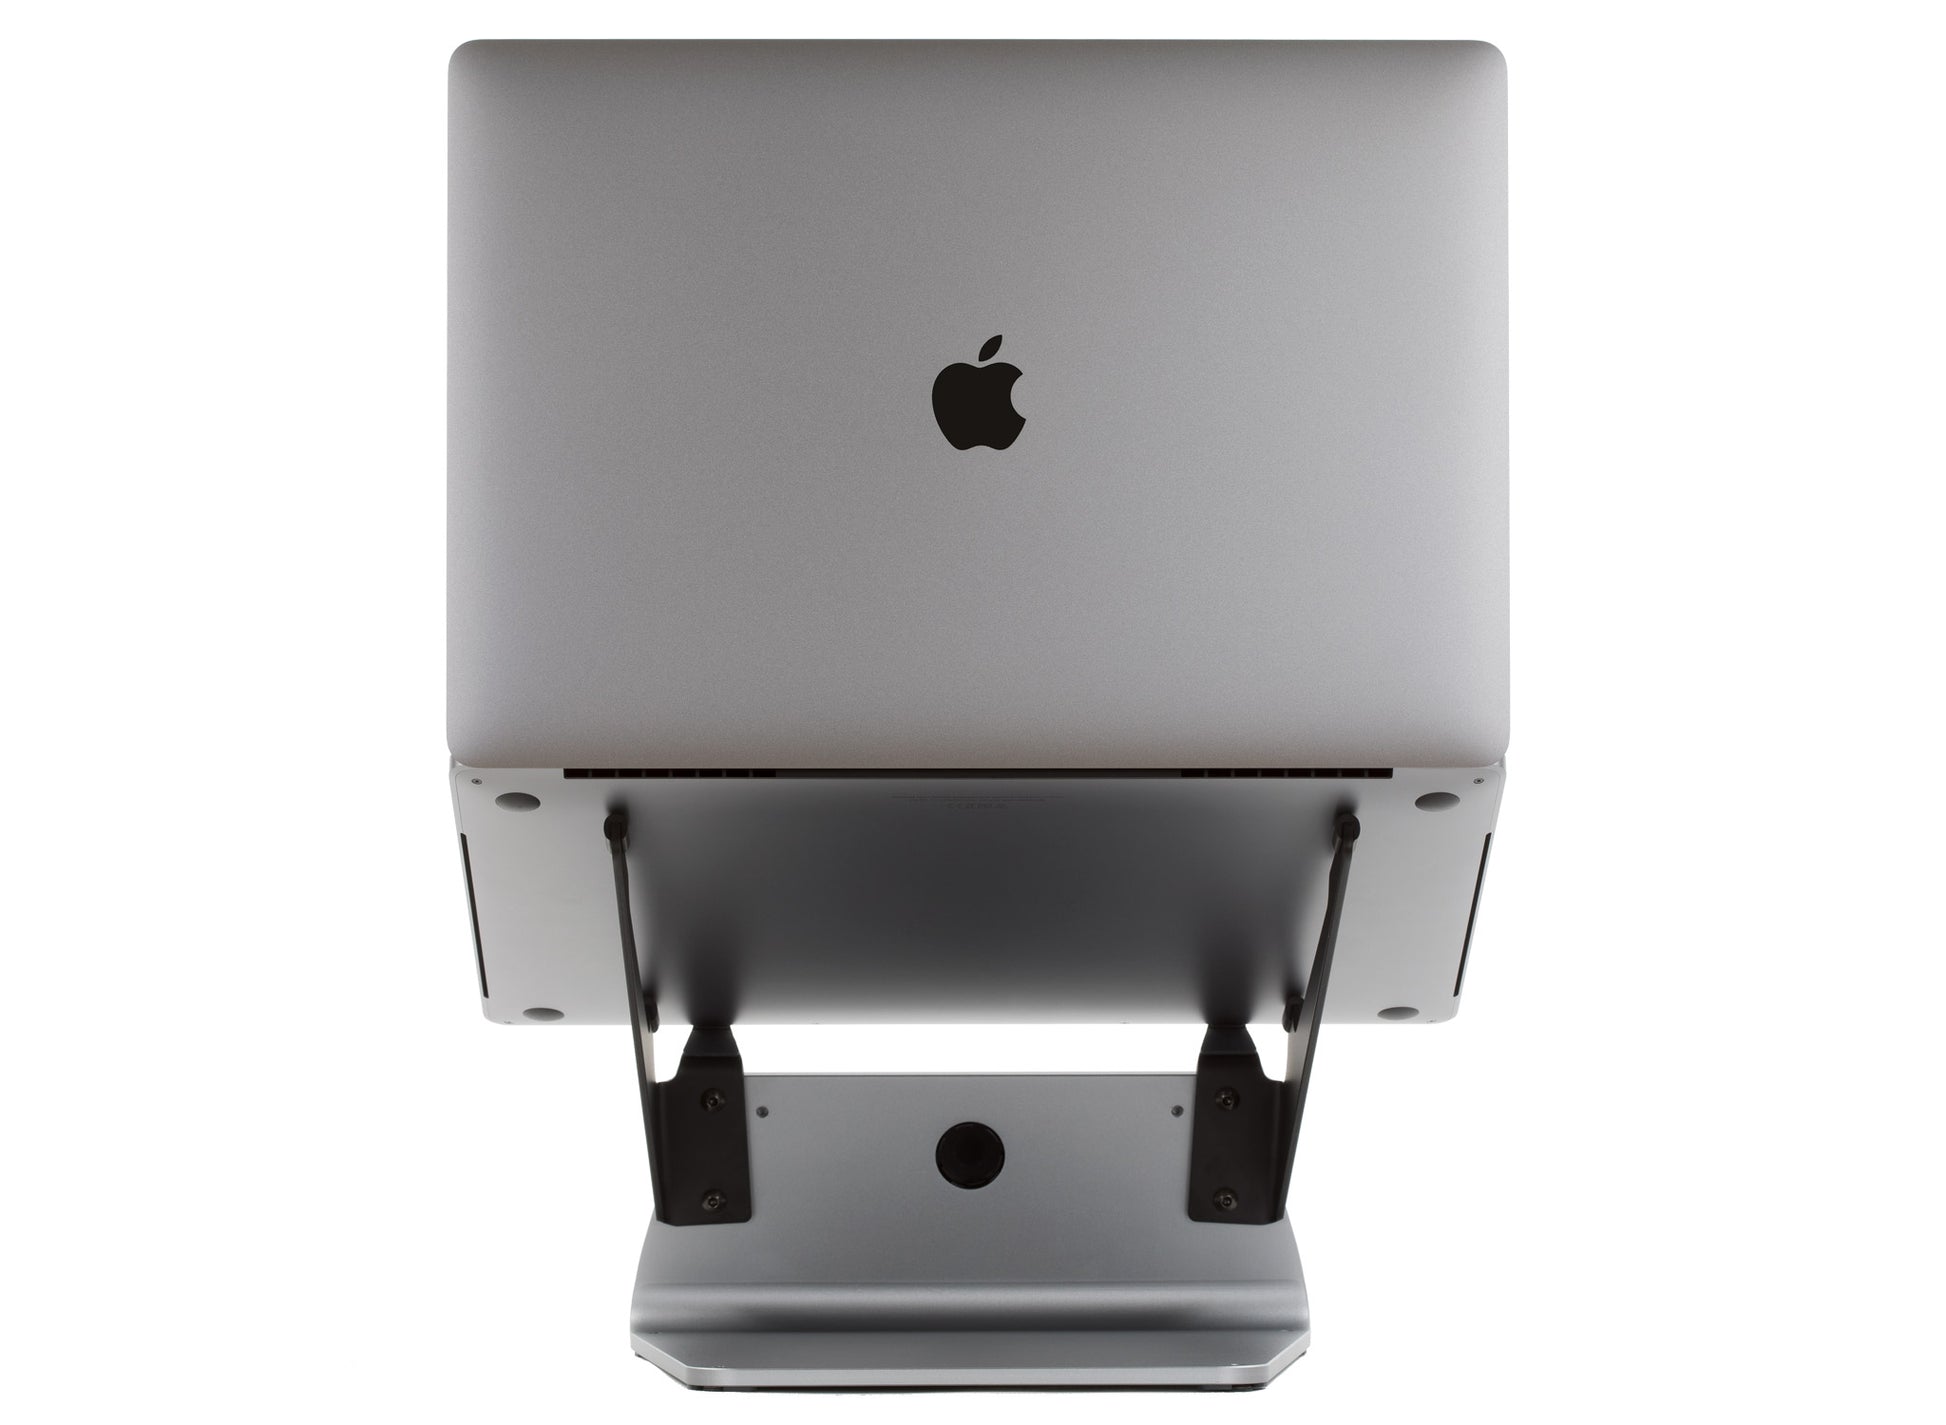 SVALT Cooling Stand model SxN gray back view for silent passive cooling performance with Apple laptop MacBook Pro